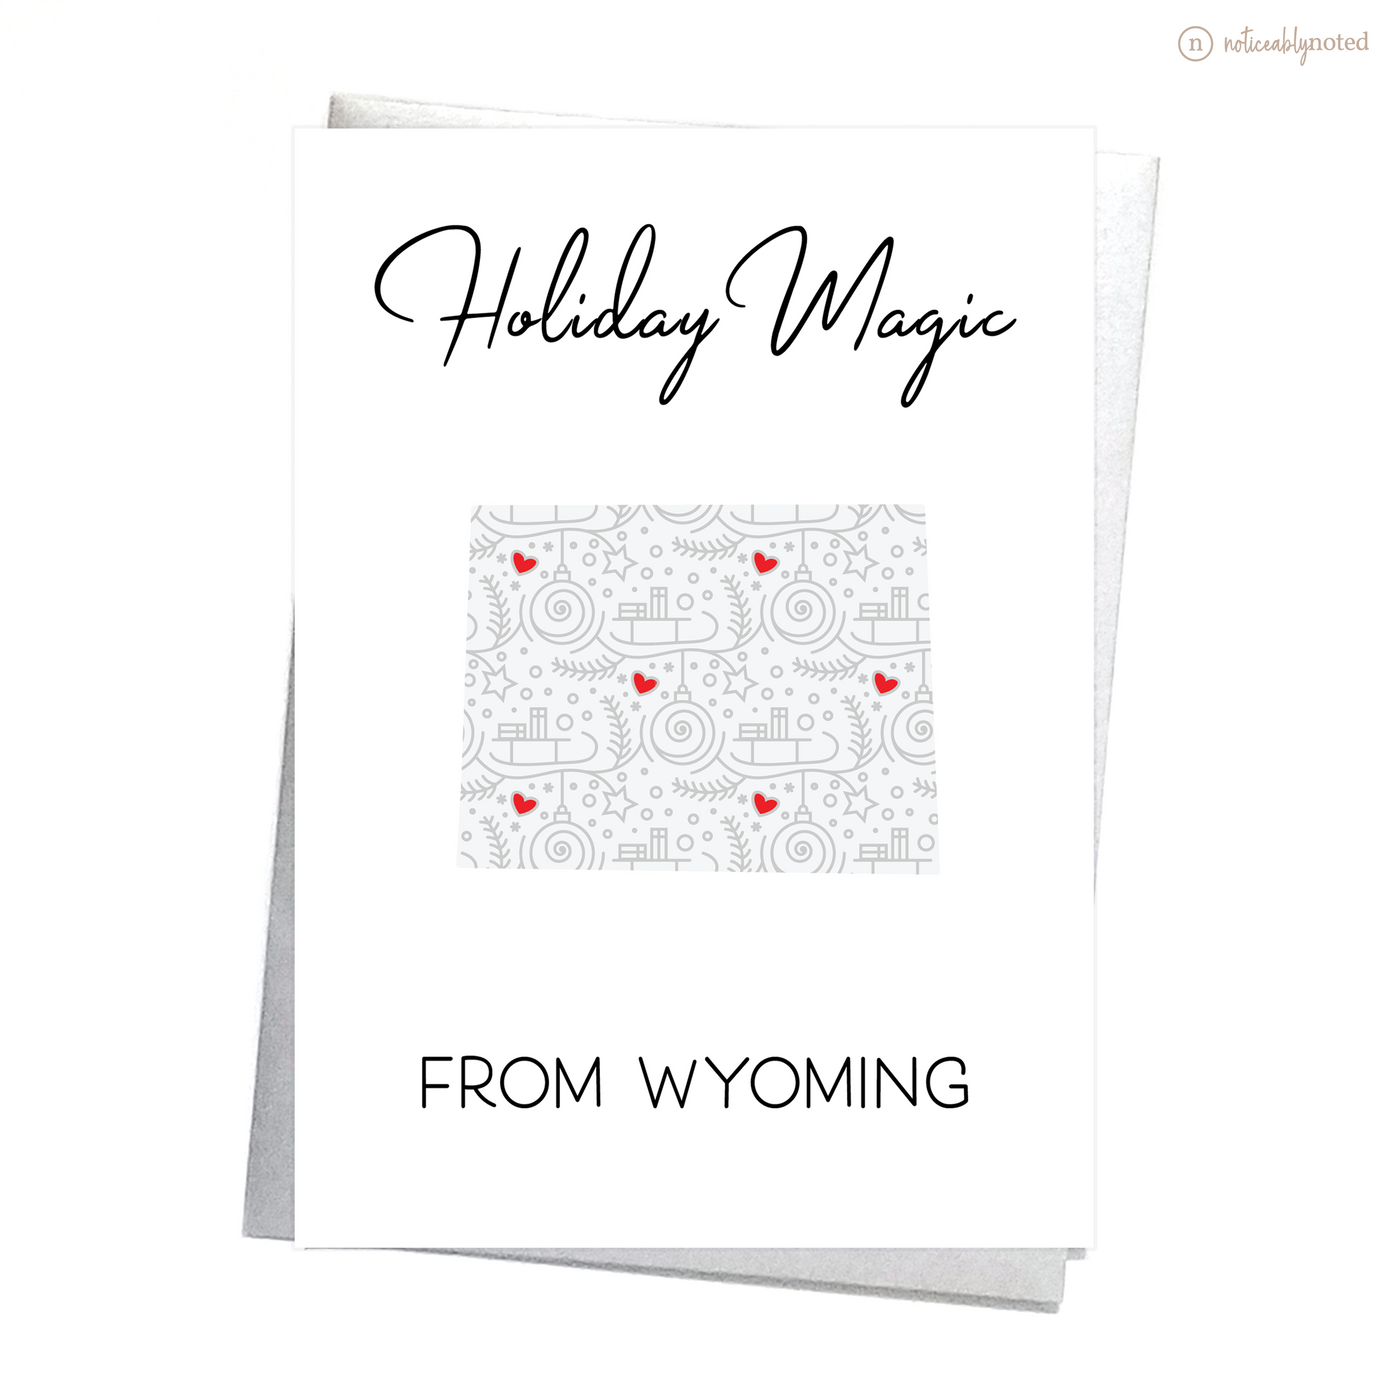 Wyoming Holiday Card - Holiday Magic| Noticeably Noted